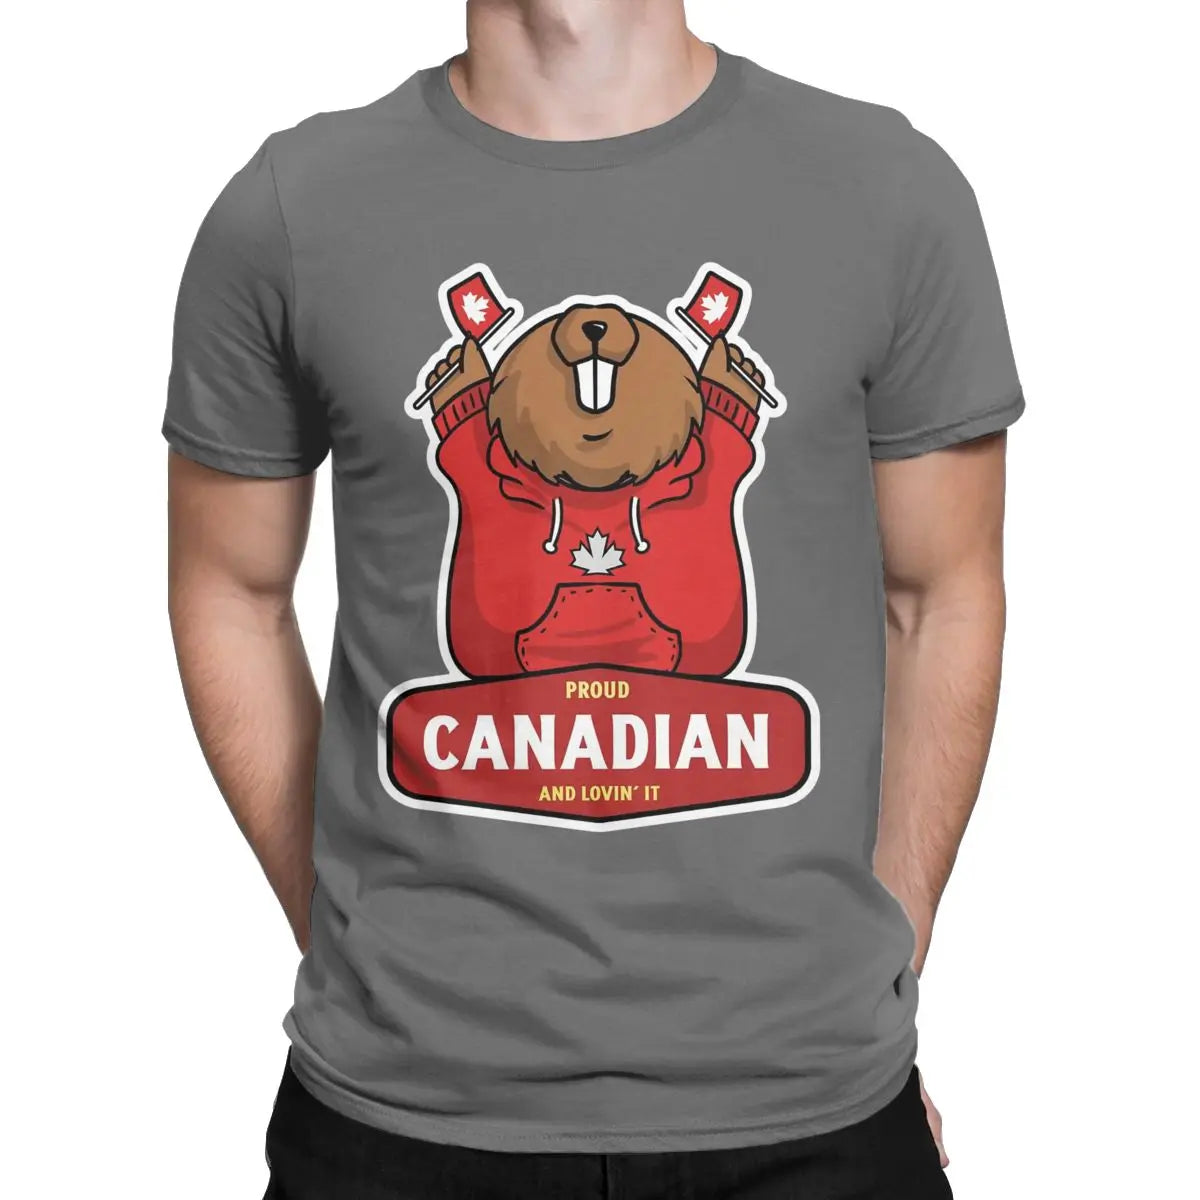 Proud Canadian Beaver T-Shirt: Celebrate Canada Day in Style